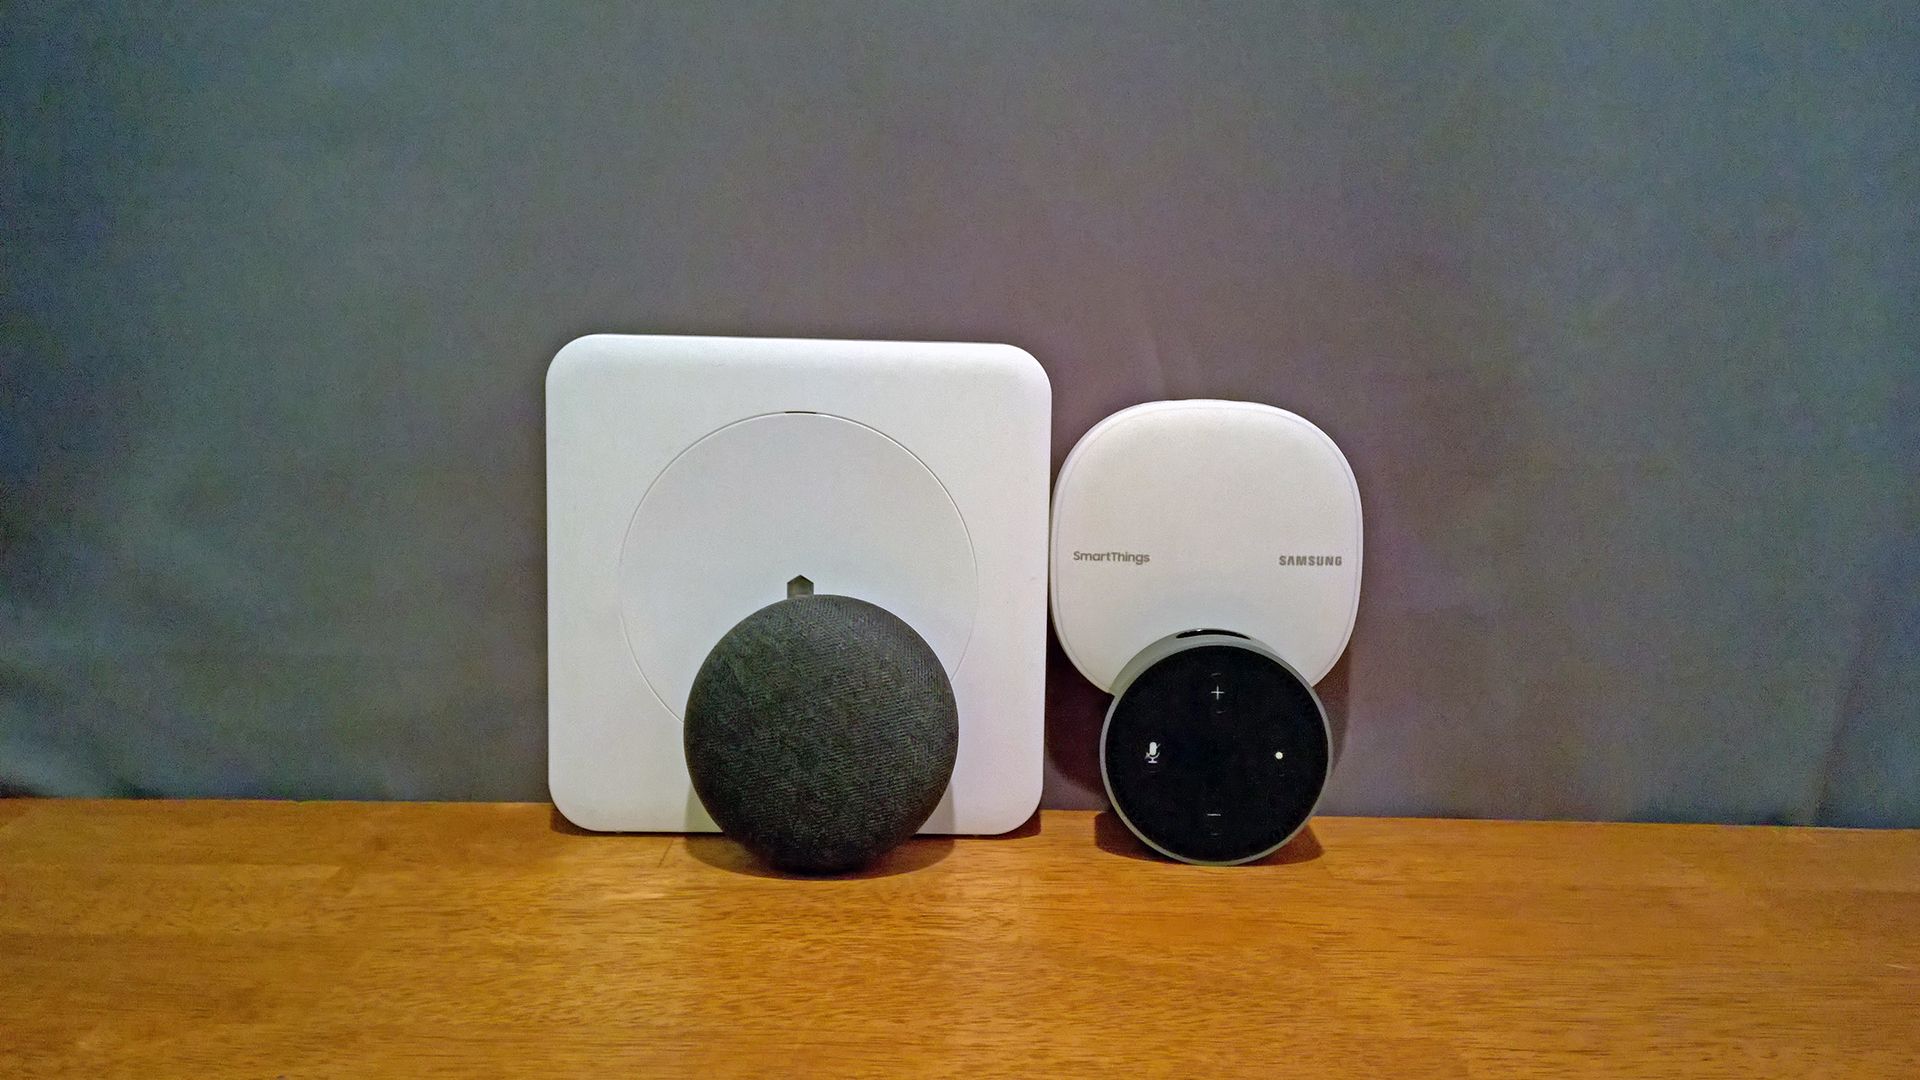 A Nest mini and Echo dot in front of a Wink and SmartThings hub